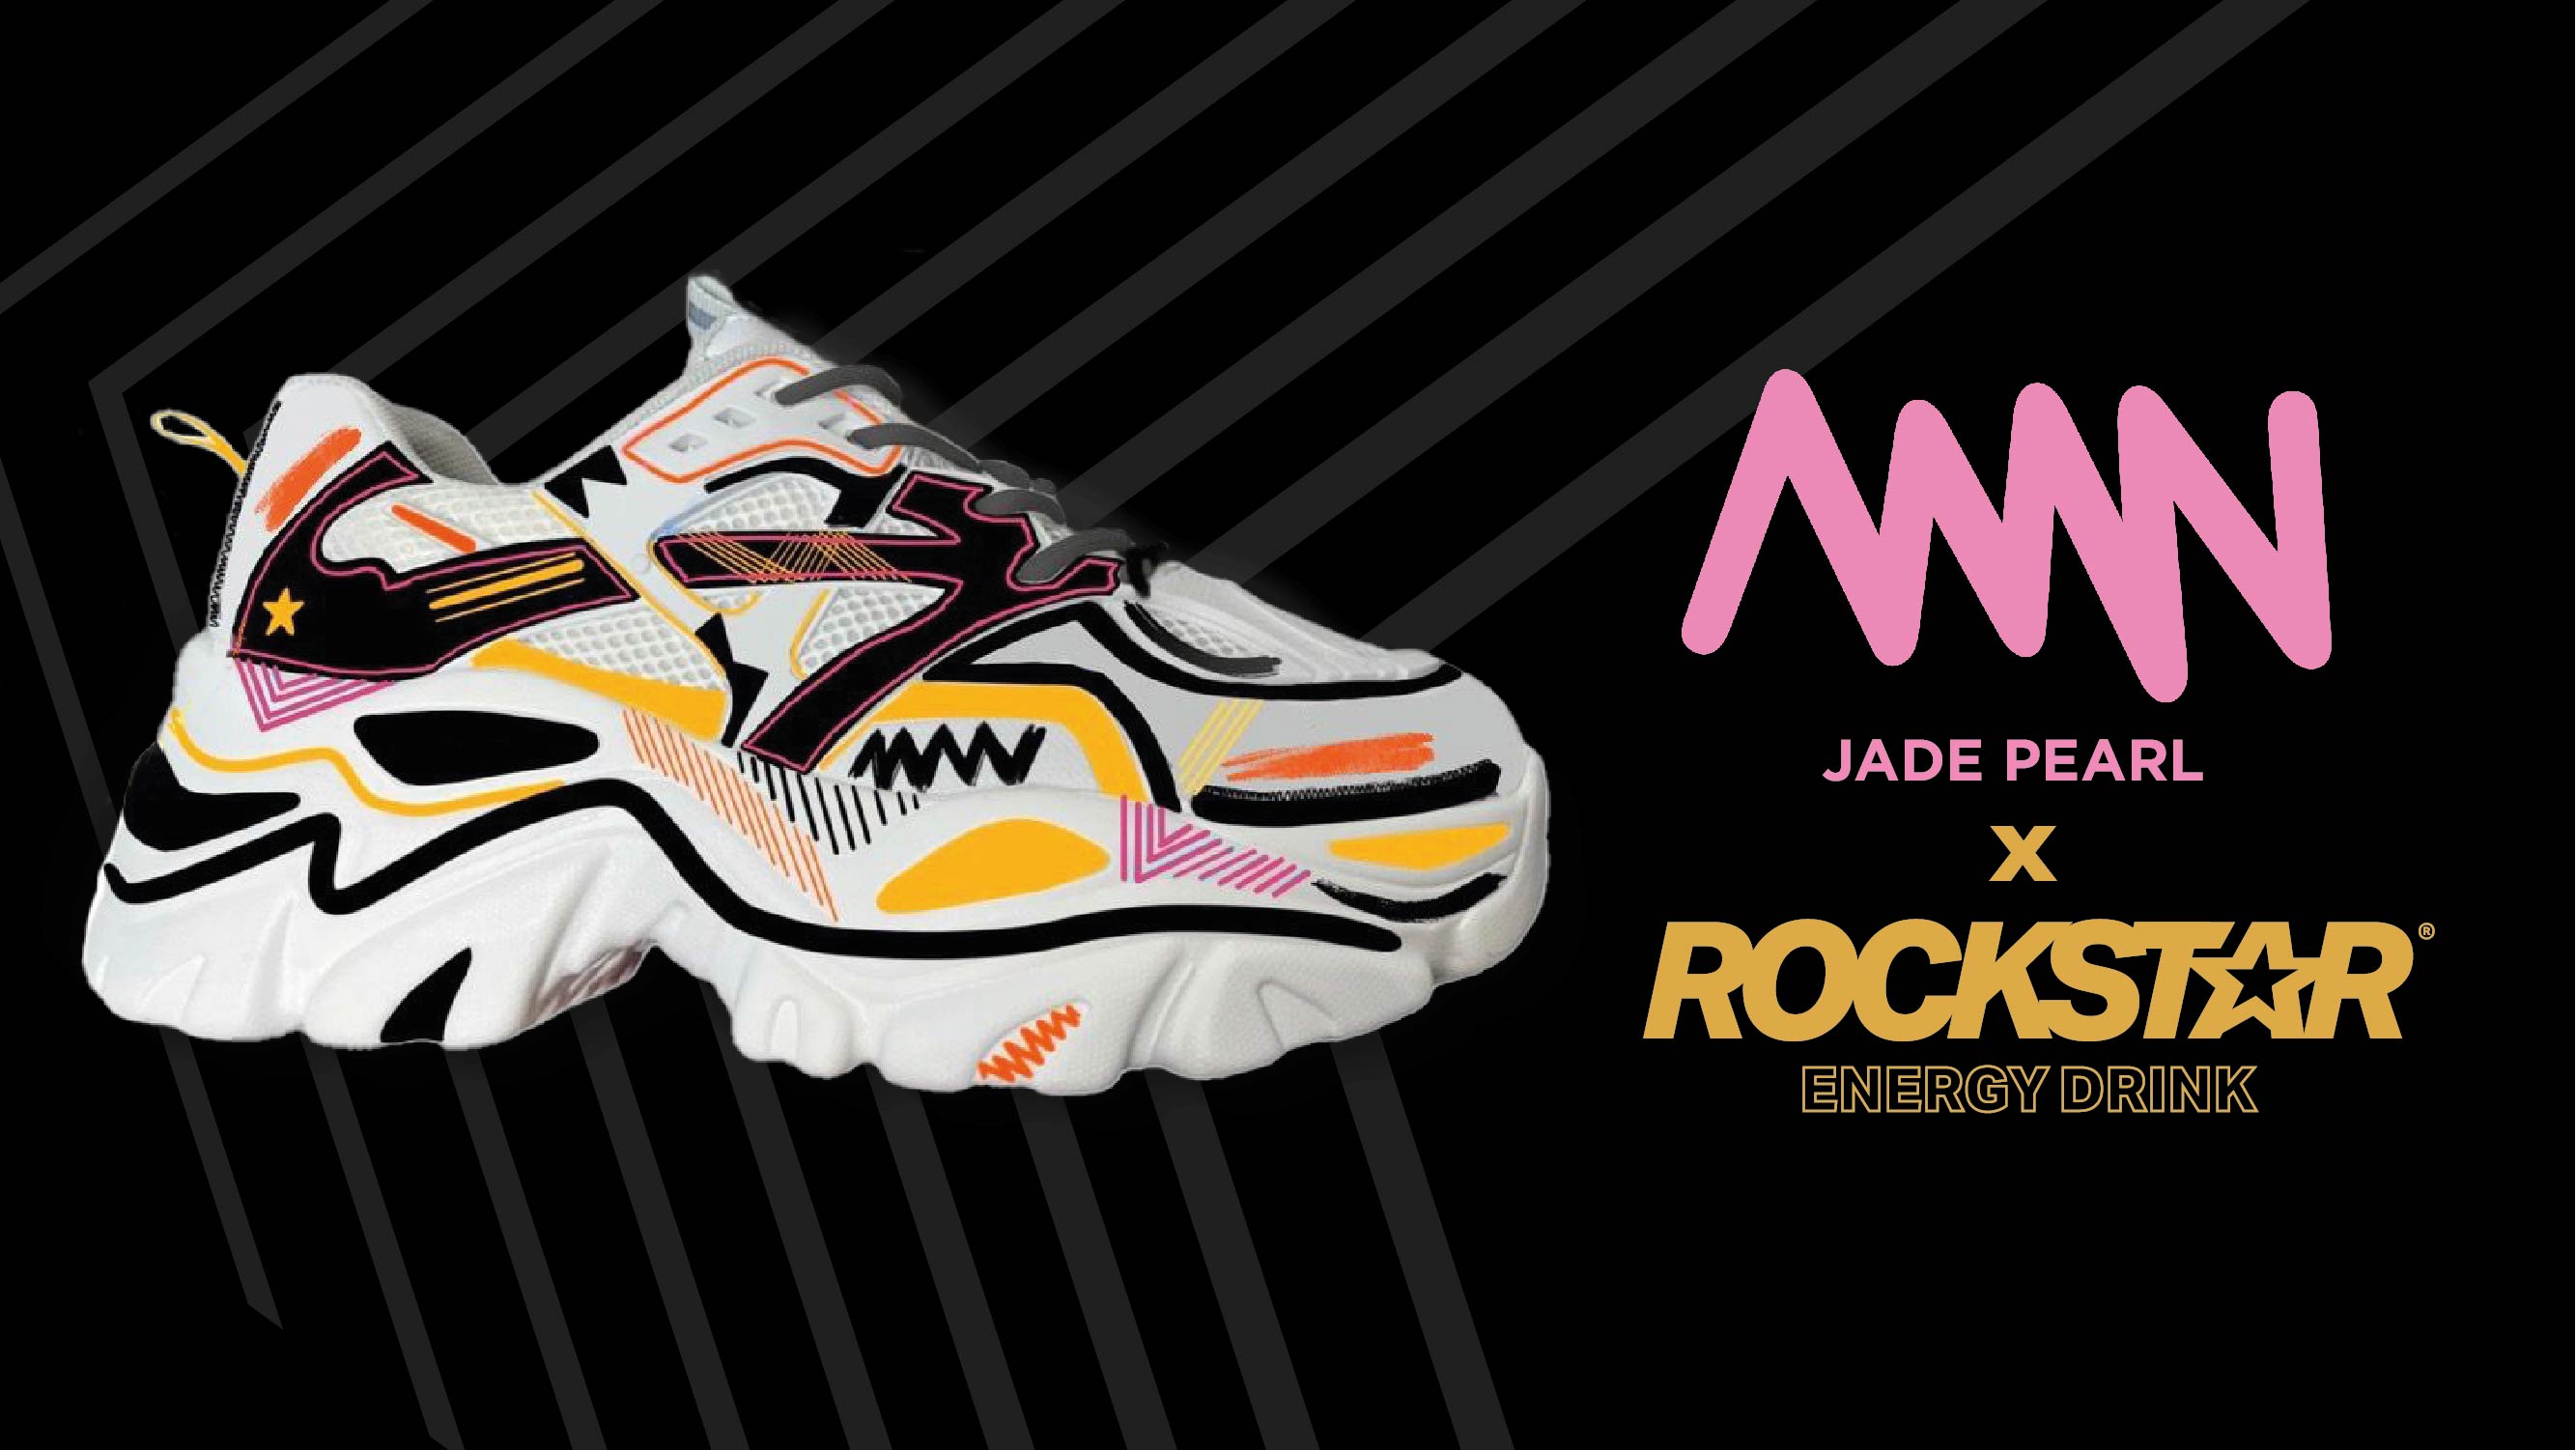 ROCKSTAR® ENERGY DRINK TEAMS UP WITH JADE PEARL TO GIVE AWAY LIMITED-EDITION, HAND-PAINTED TRAINERS